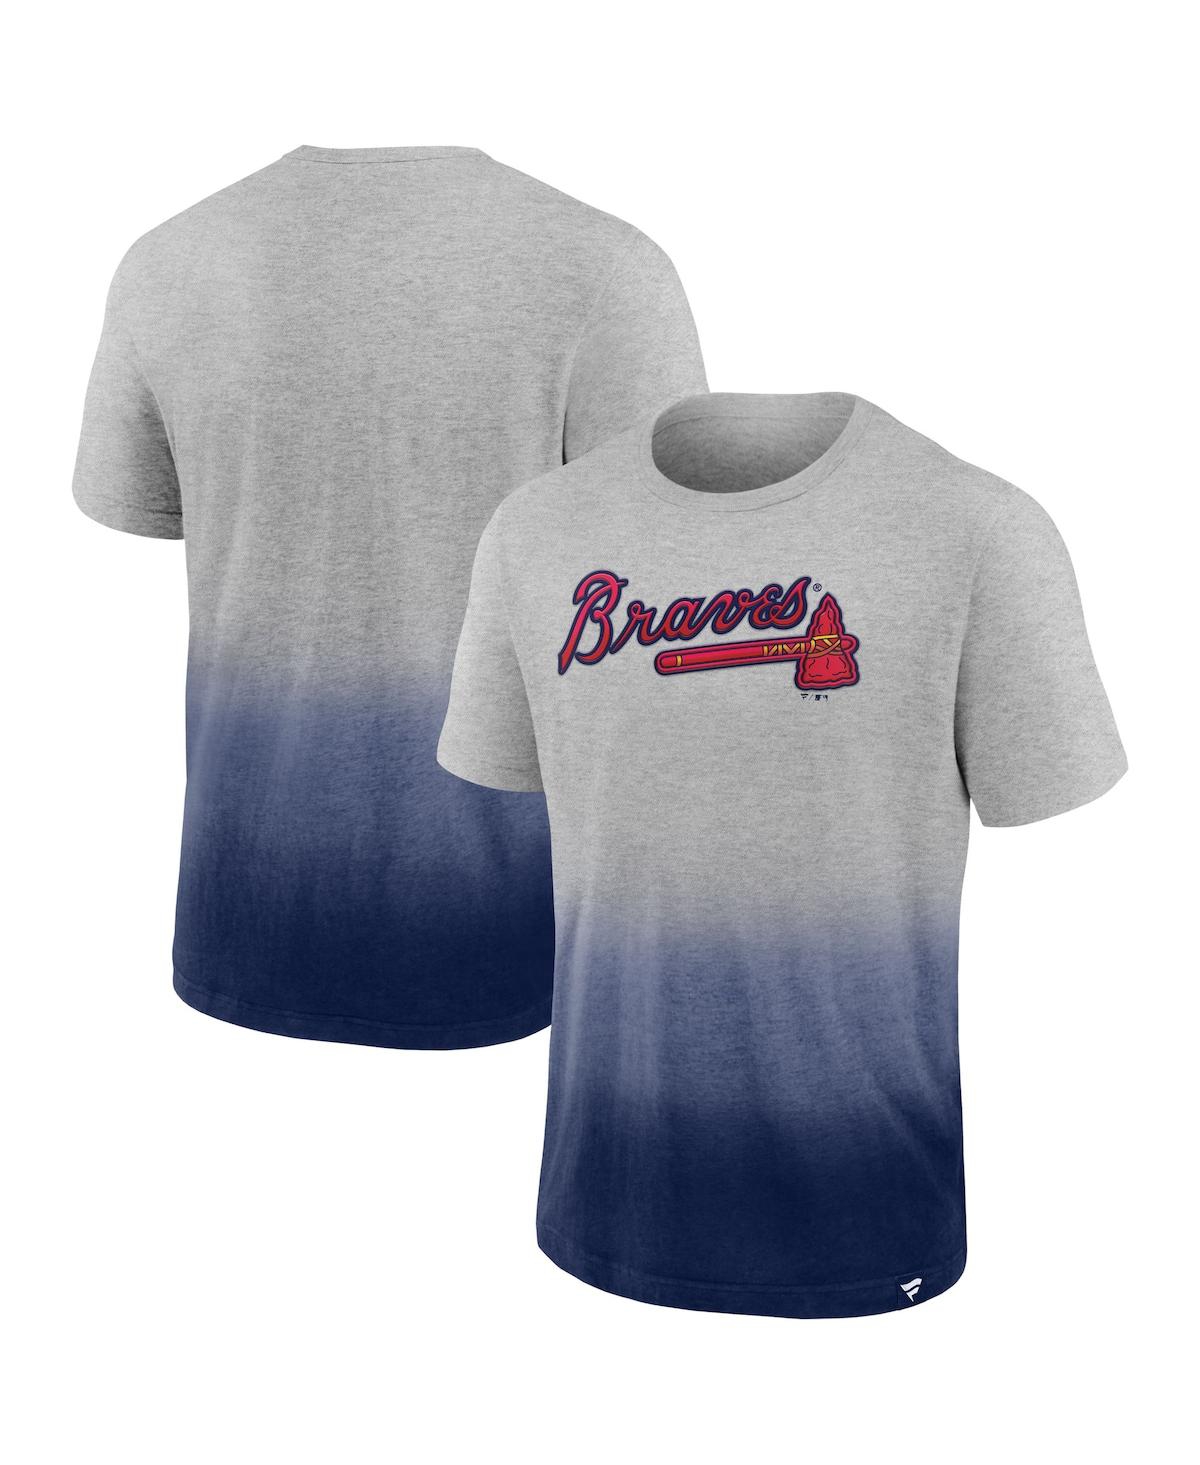 Atlanta Braves Fanatics Branded Cooperstown Wahconah T-Shirt - Heathered Gray